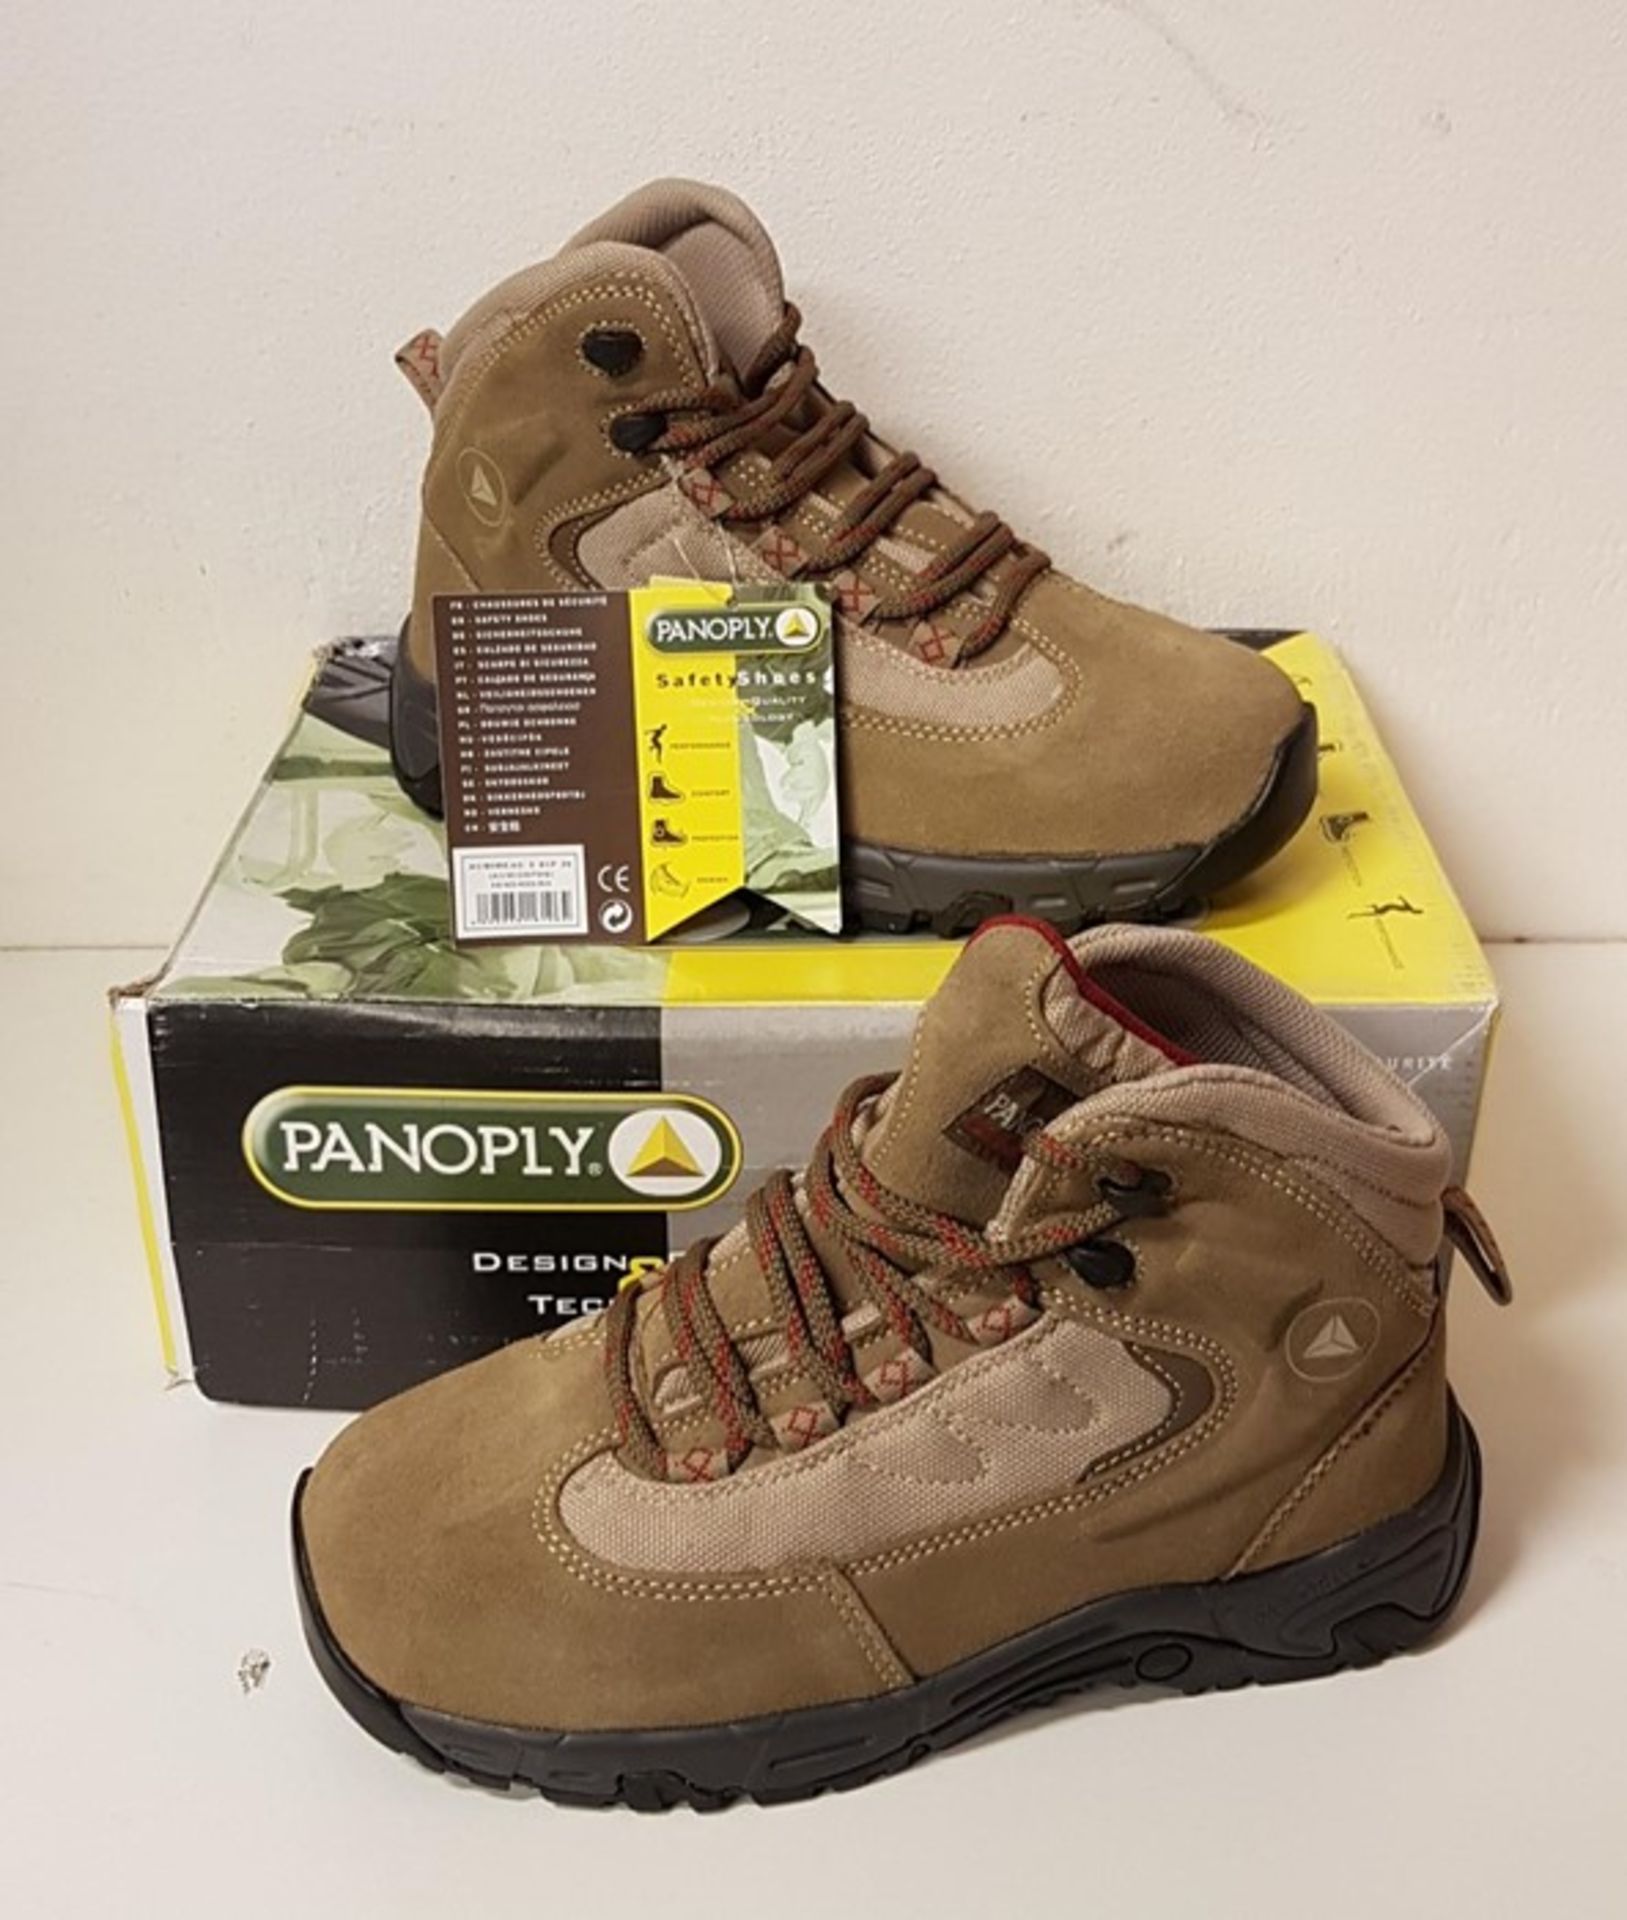 1 BOXED PANOPLY SAFETY BOOTS IN BEIGE HIGH ANKLE, SIZE 3 (VIEWING HIGHLY RECOMMENDED)